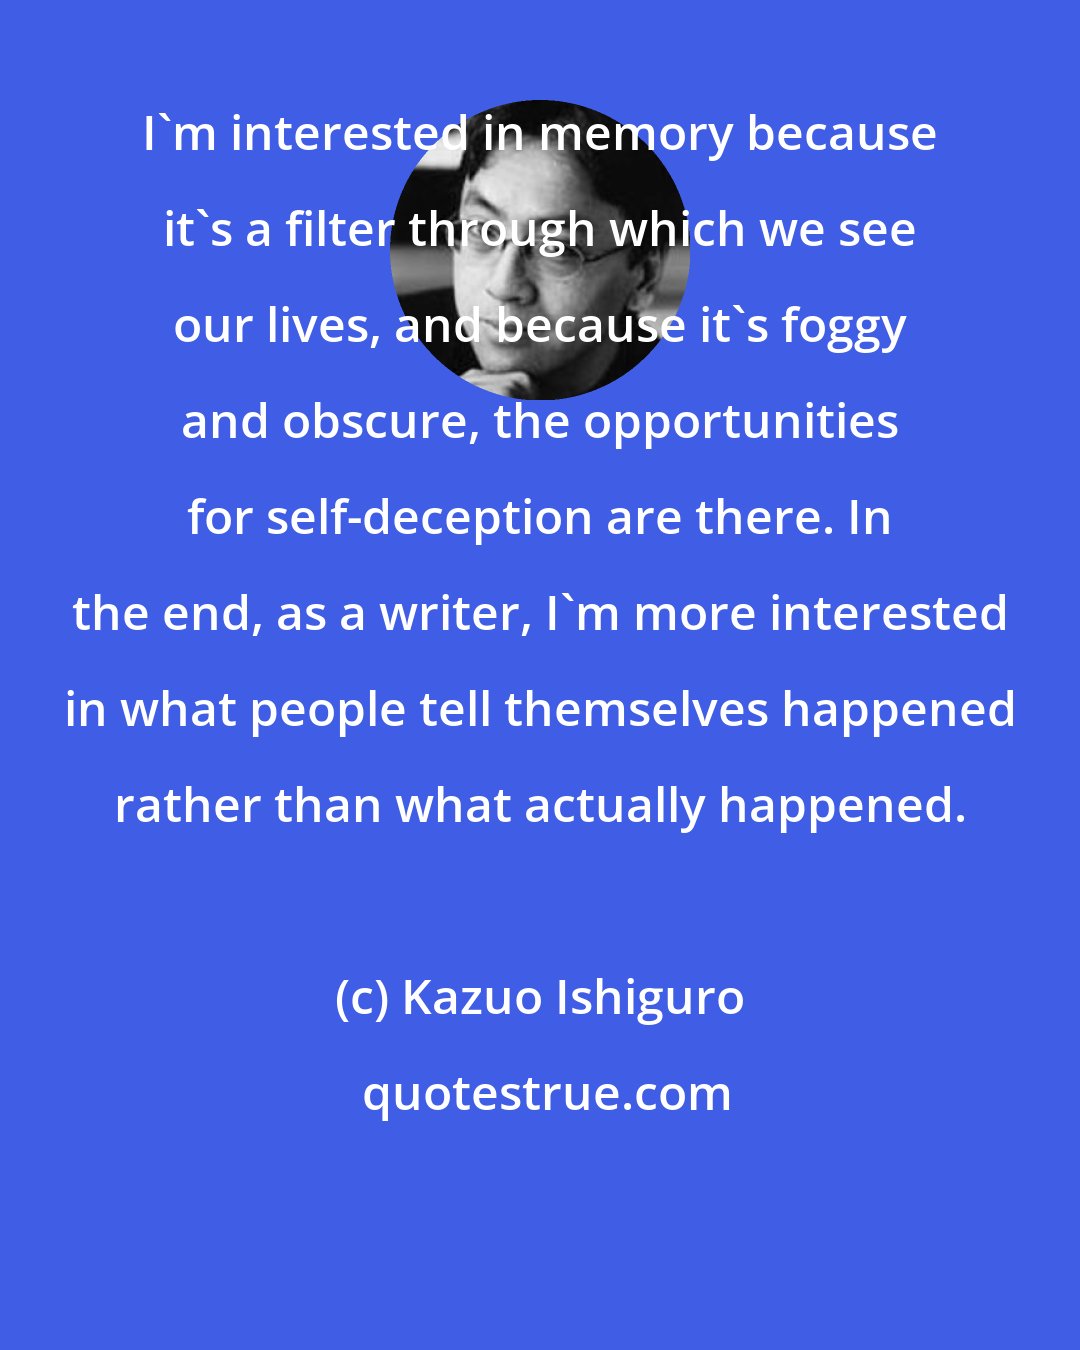 Kazuo Ishiguro: I'm interested in memory because it's a filter through which we see our lives, and because it's foggy and obscure, the opportunities for self-deception are there. In the end, as a writer, I'm more interested in what people tell themselves happened rather than what actually happened.